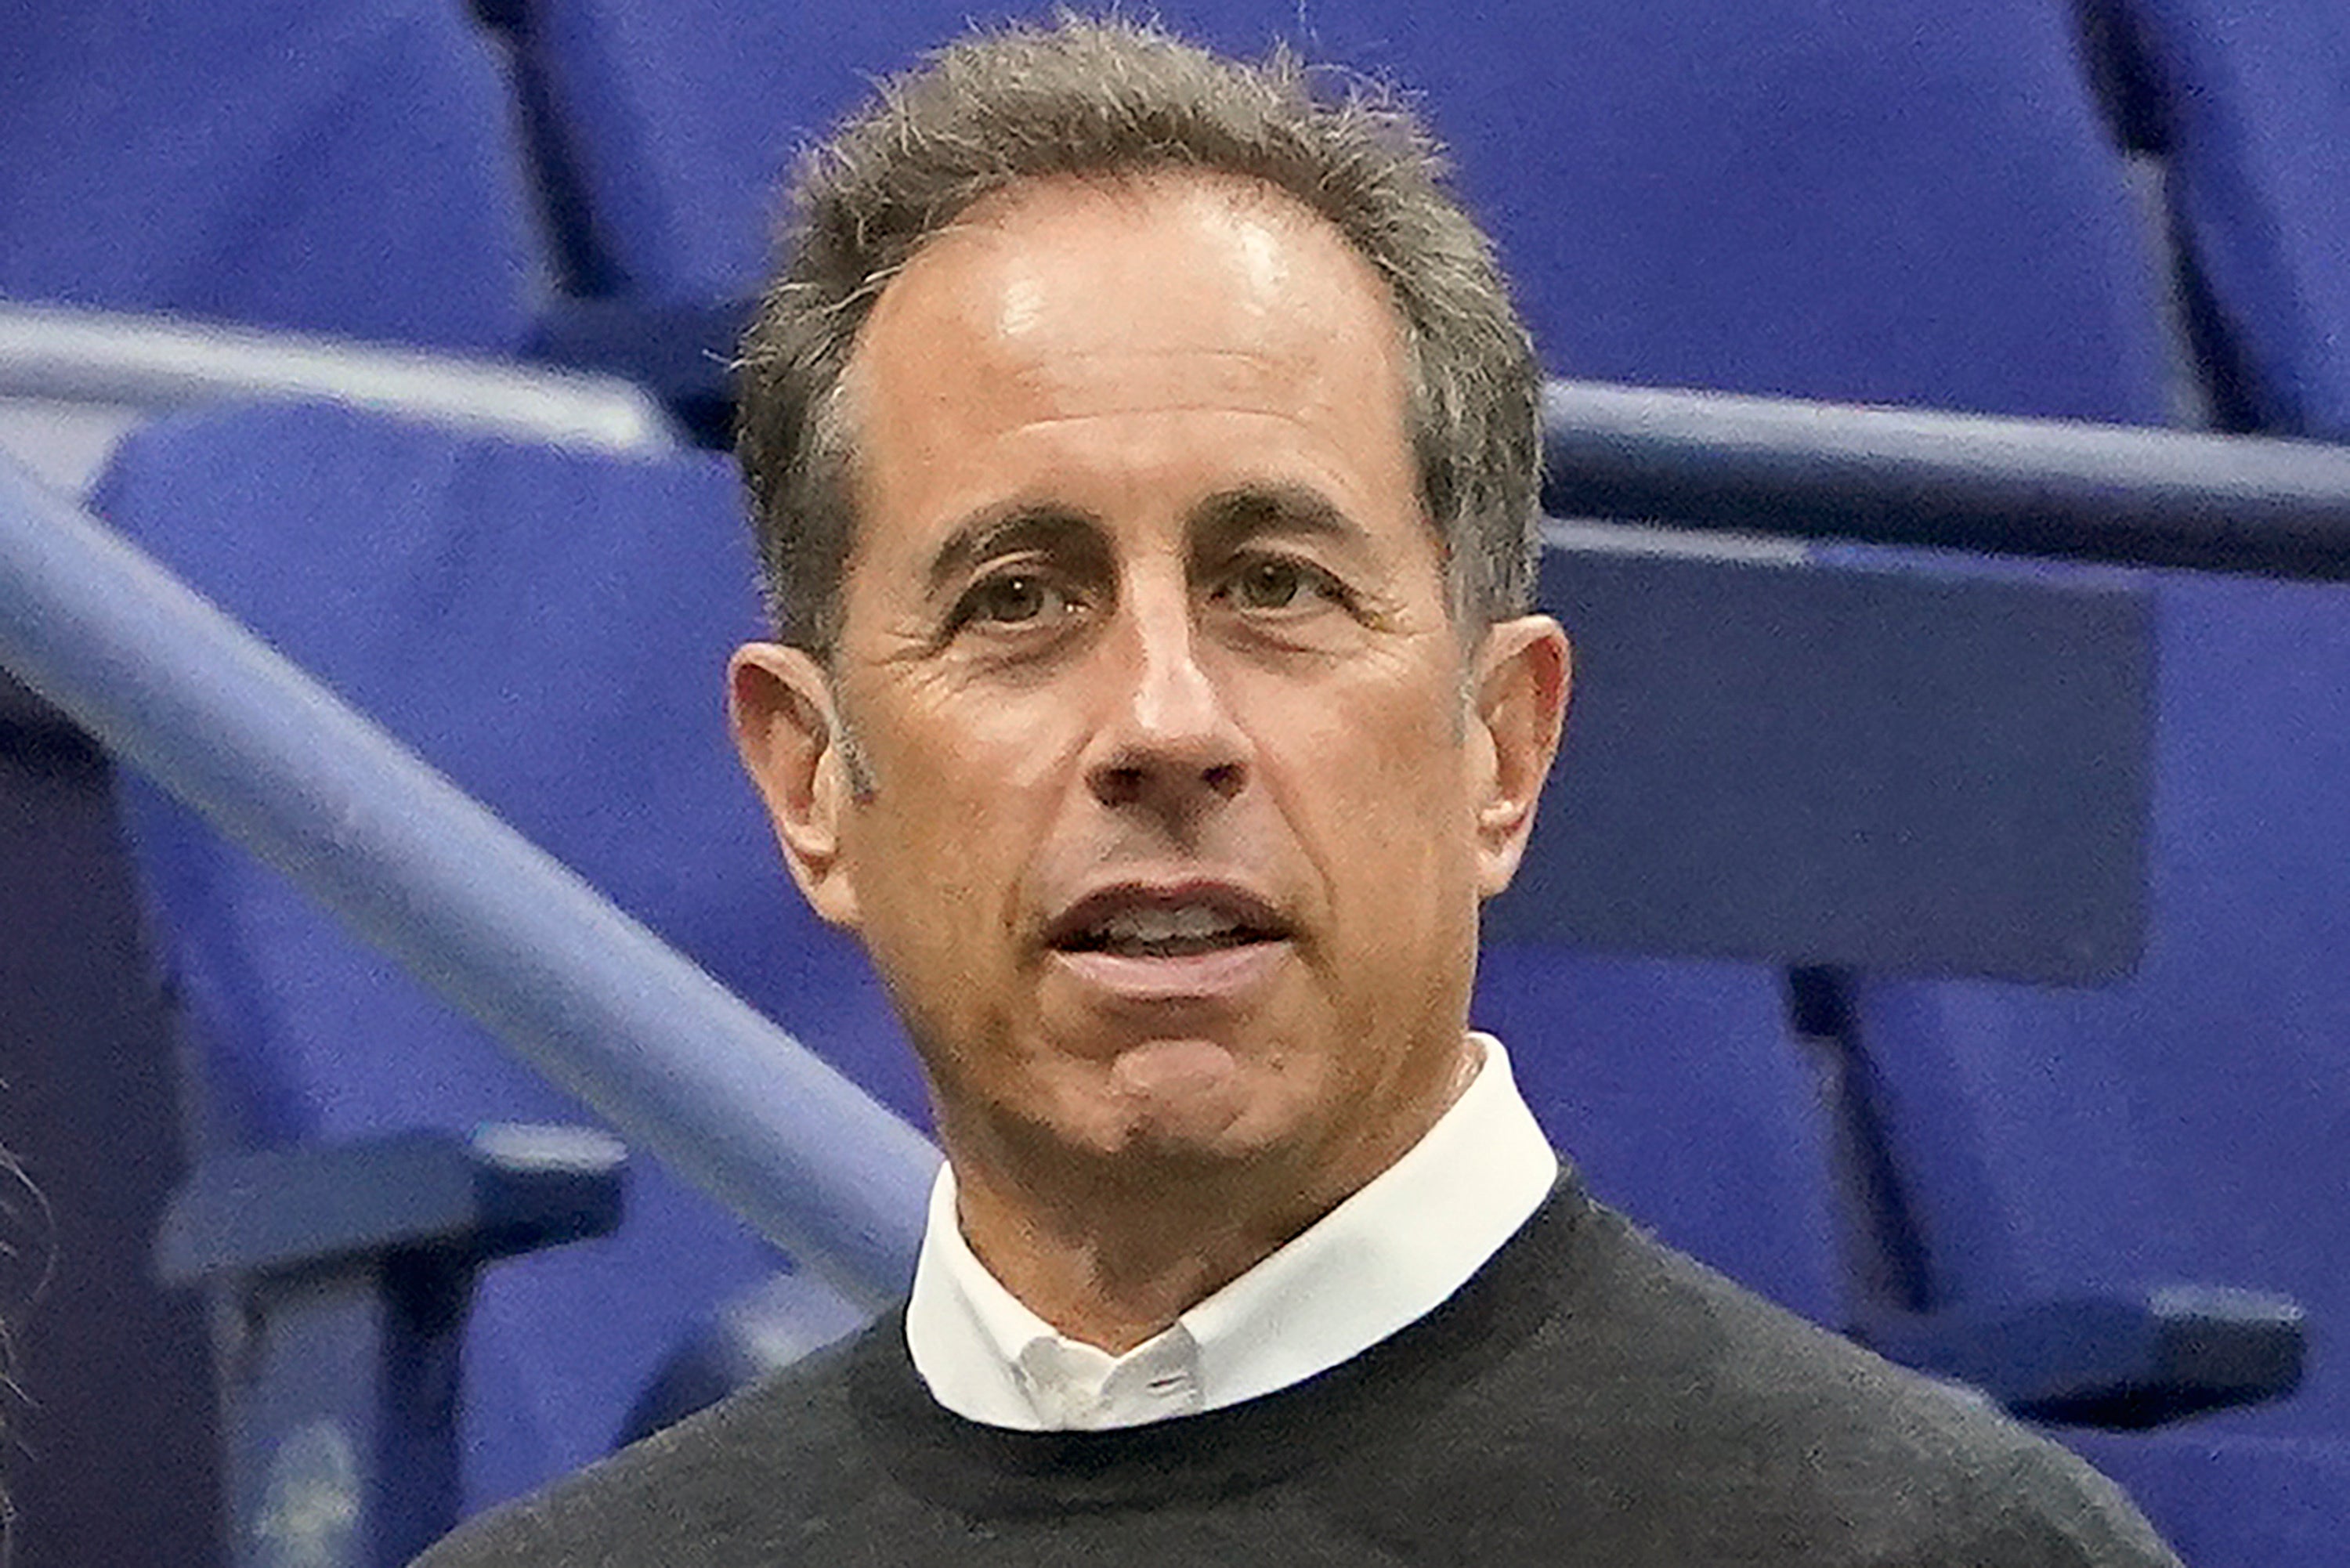 Jerry Seinfeld attends the US Open in 2022